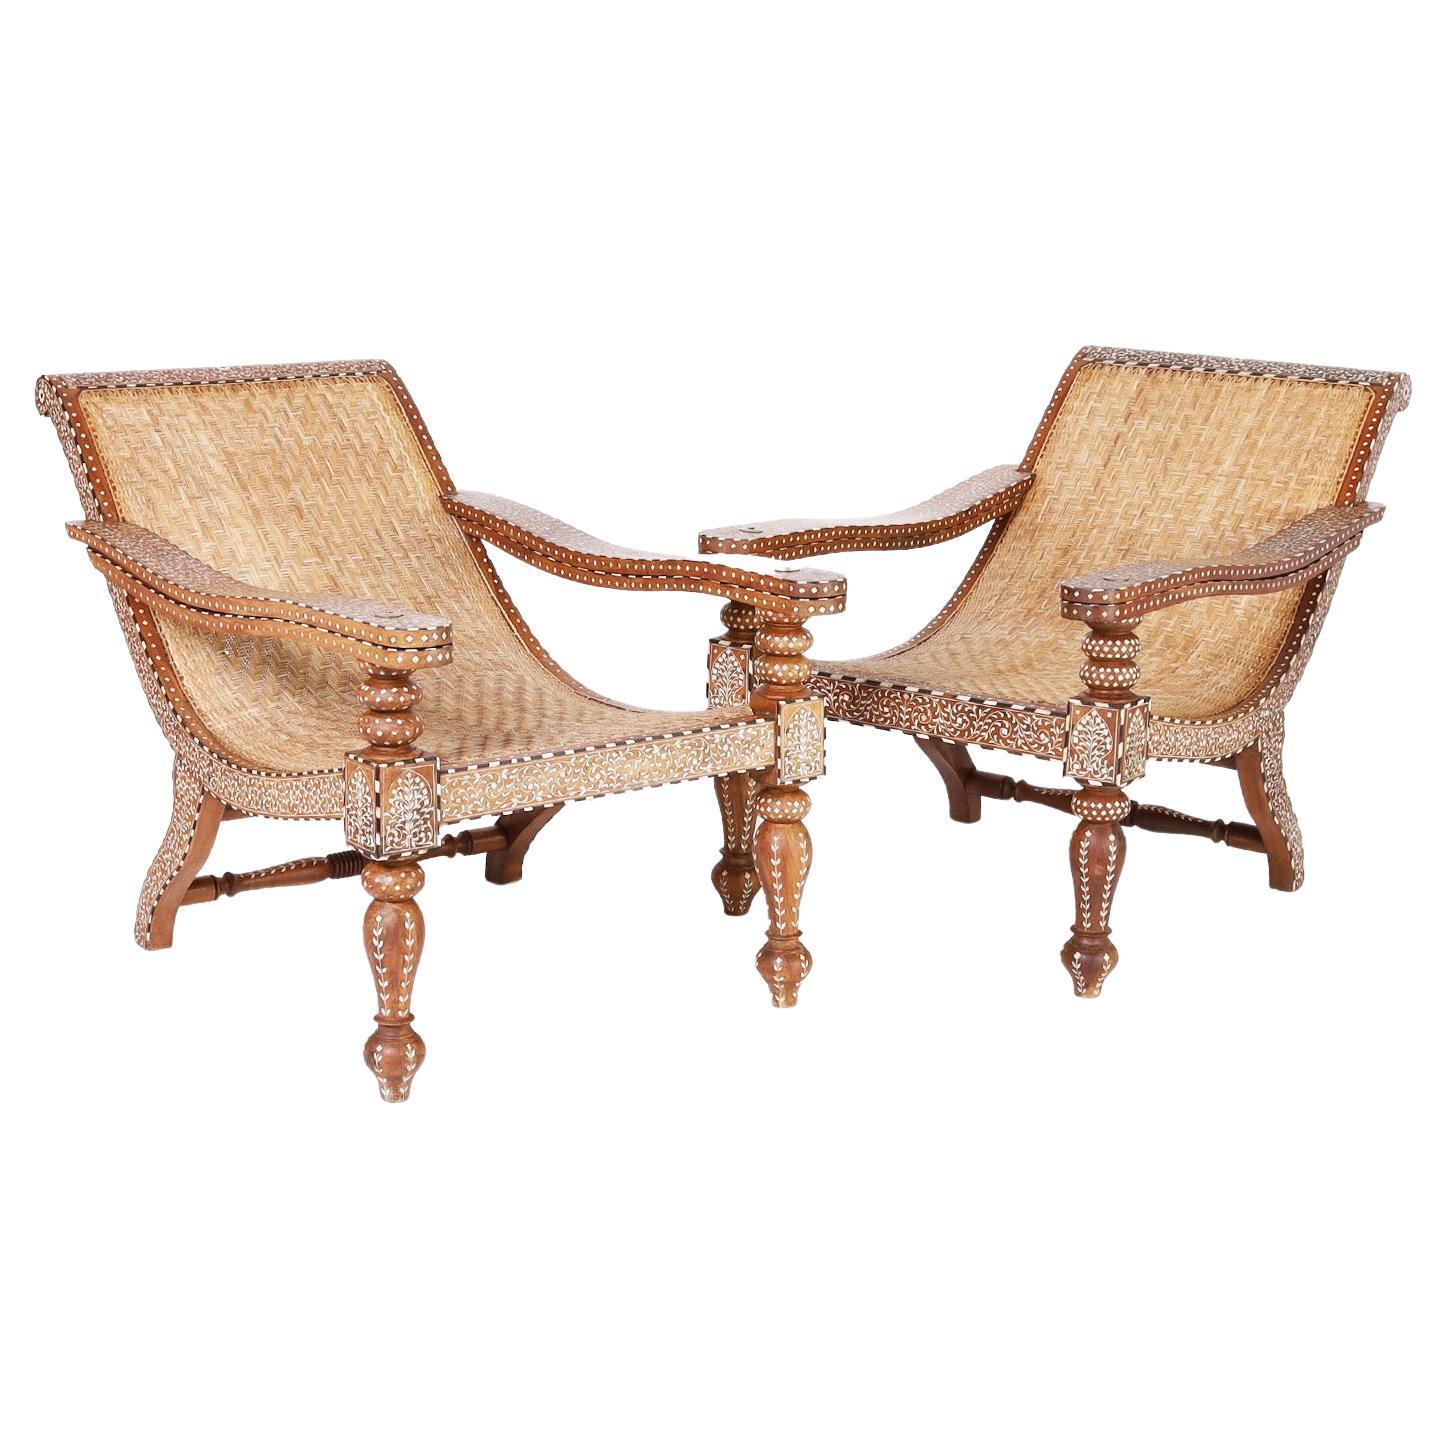 Pair of Inlaid Anglo Indian Plantation Chairs